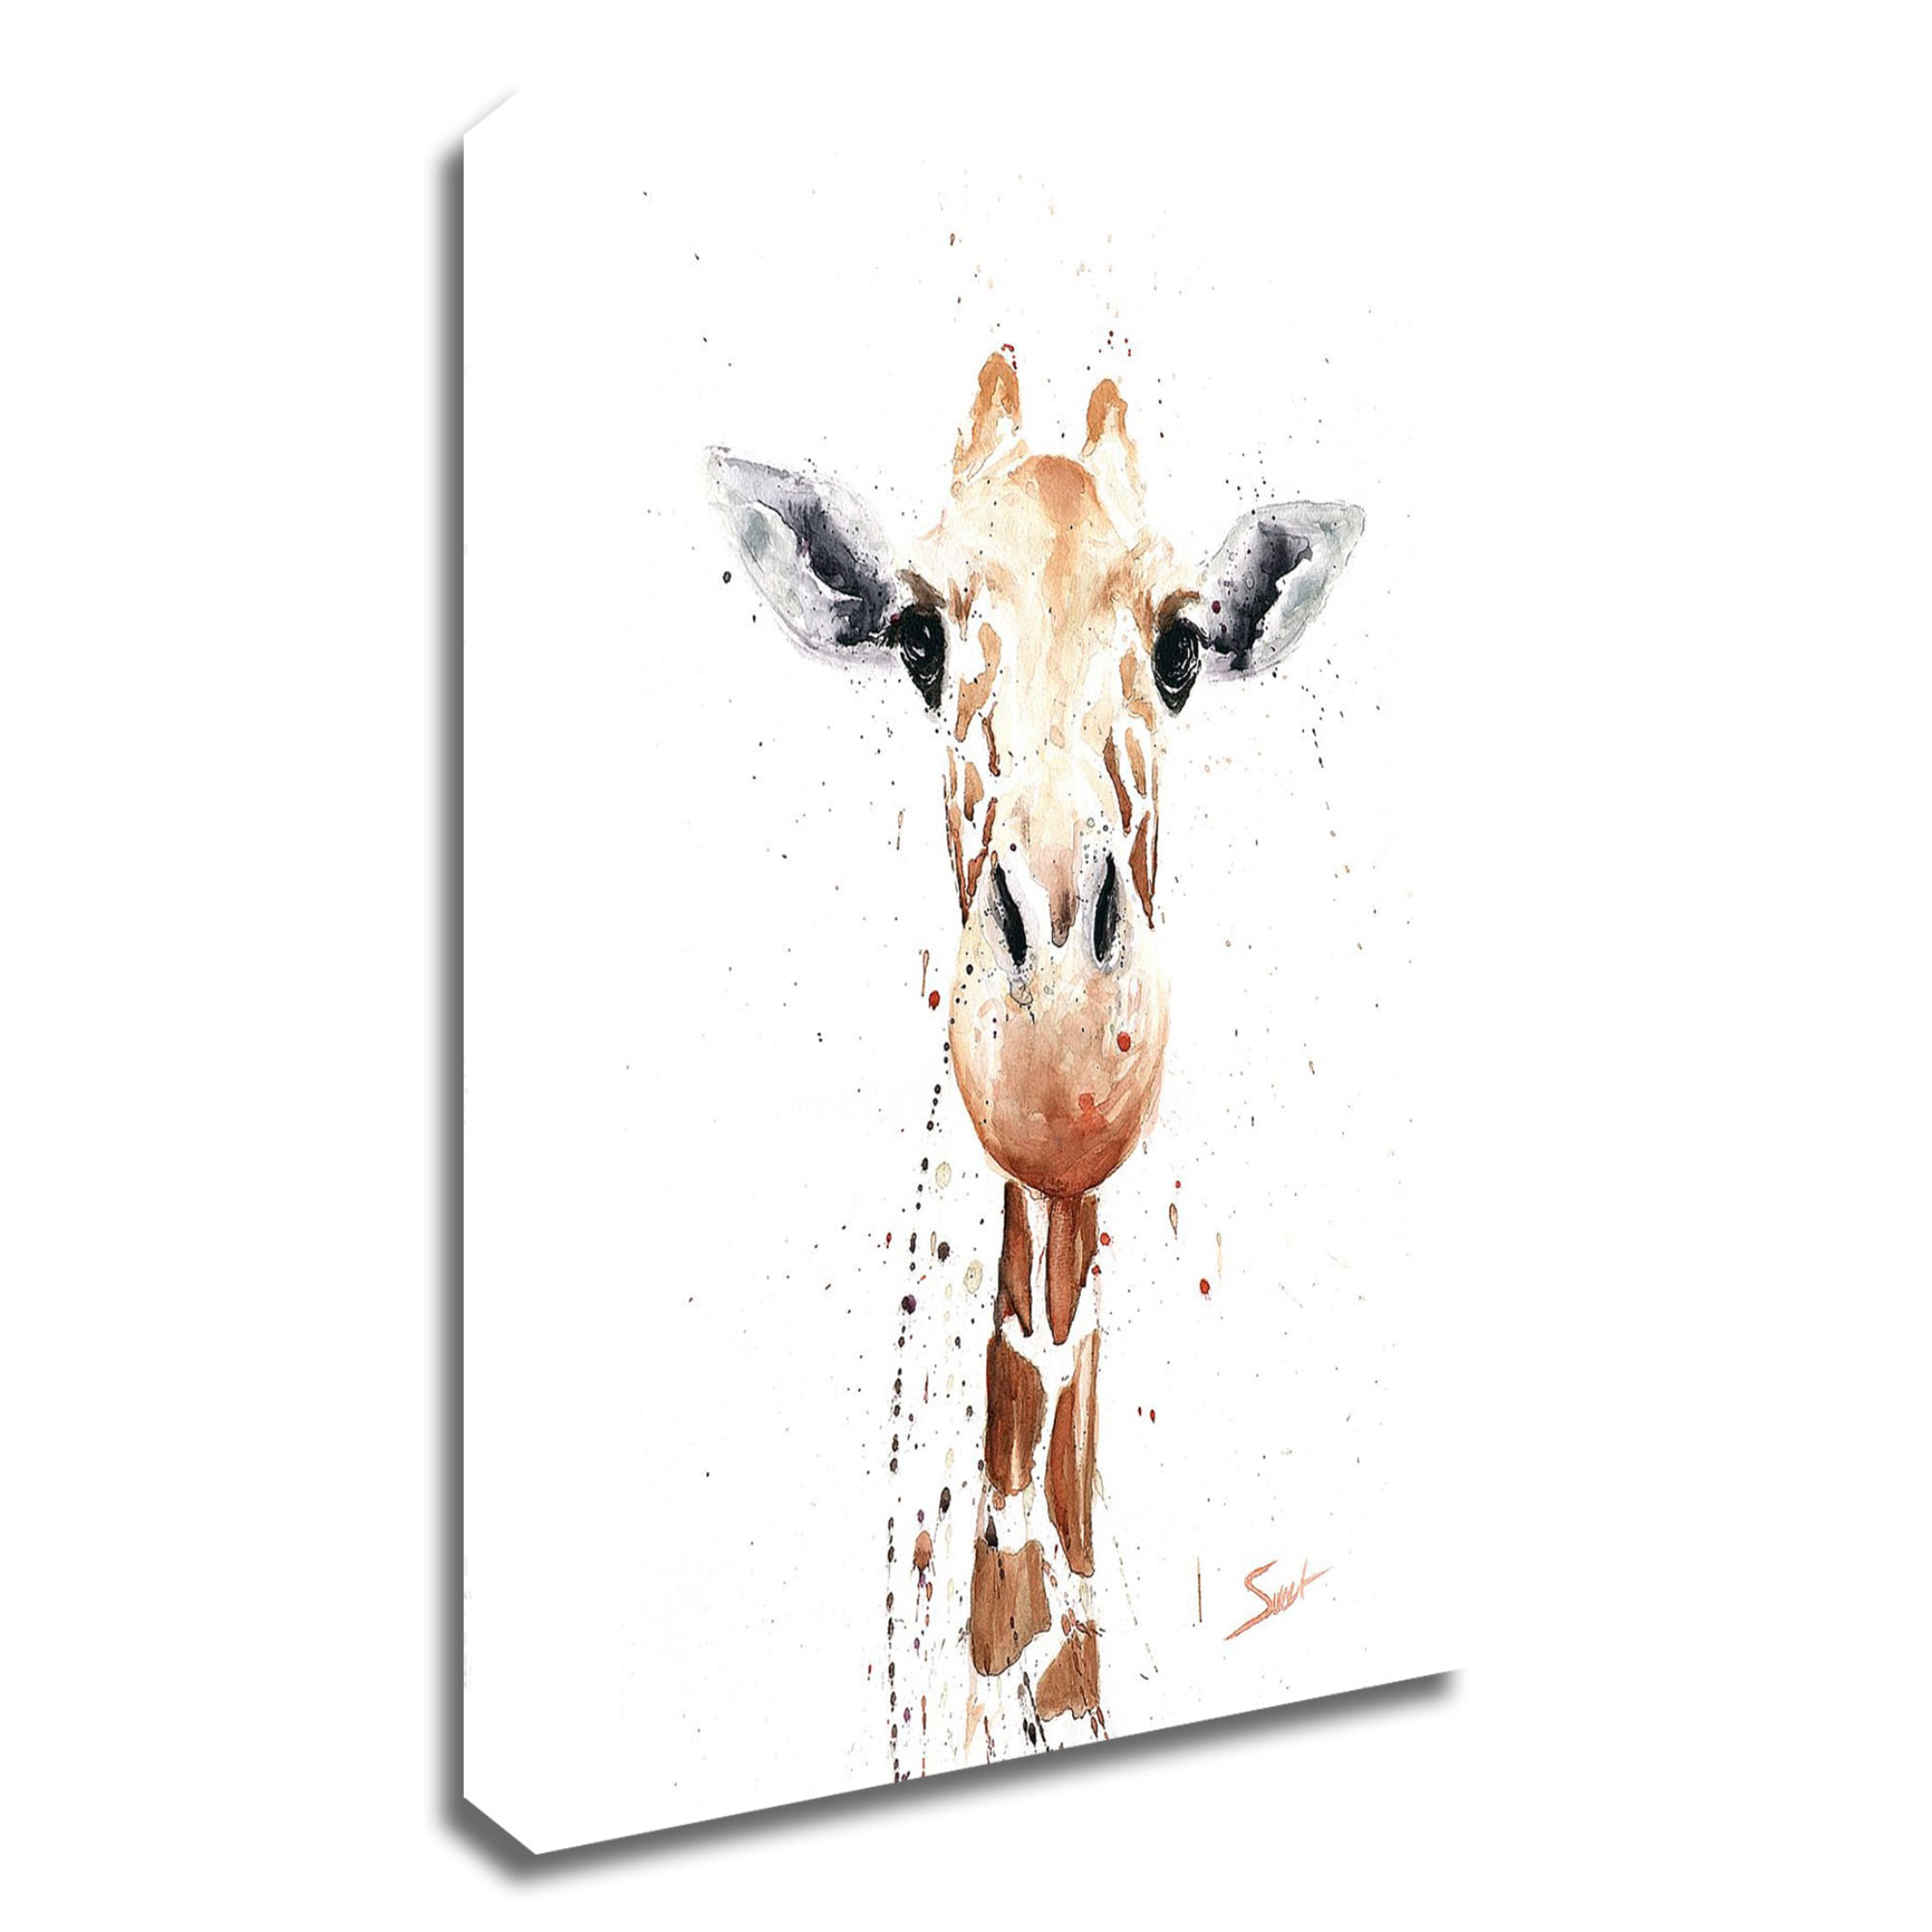 FLY SPRAY Framed 1 Panel 100% Hand Painted Oil Paintings Colorful Animal Cute Giraffes Head Modern Abstract Painting Canvas Wall Art Home Decor 